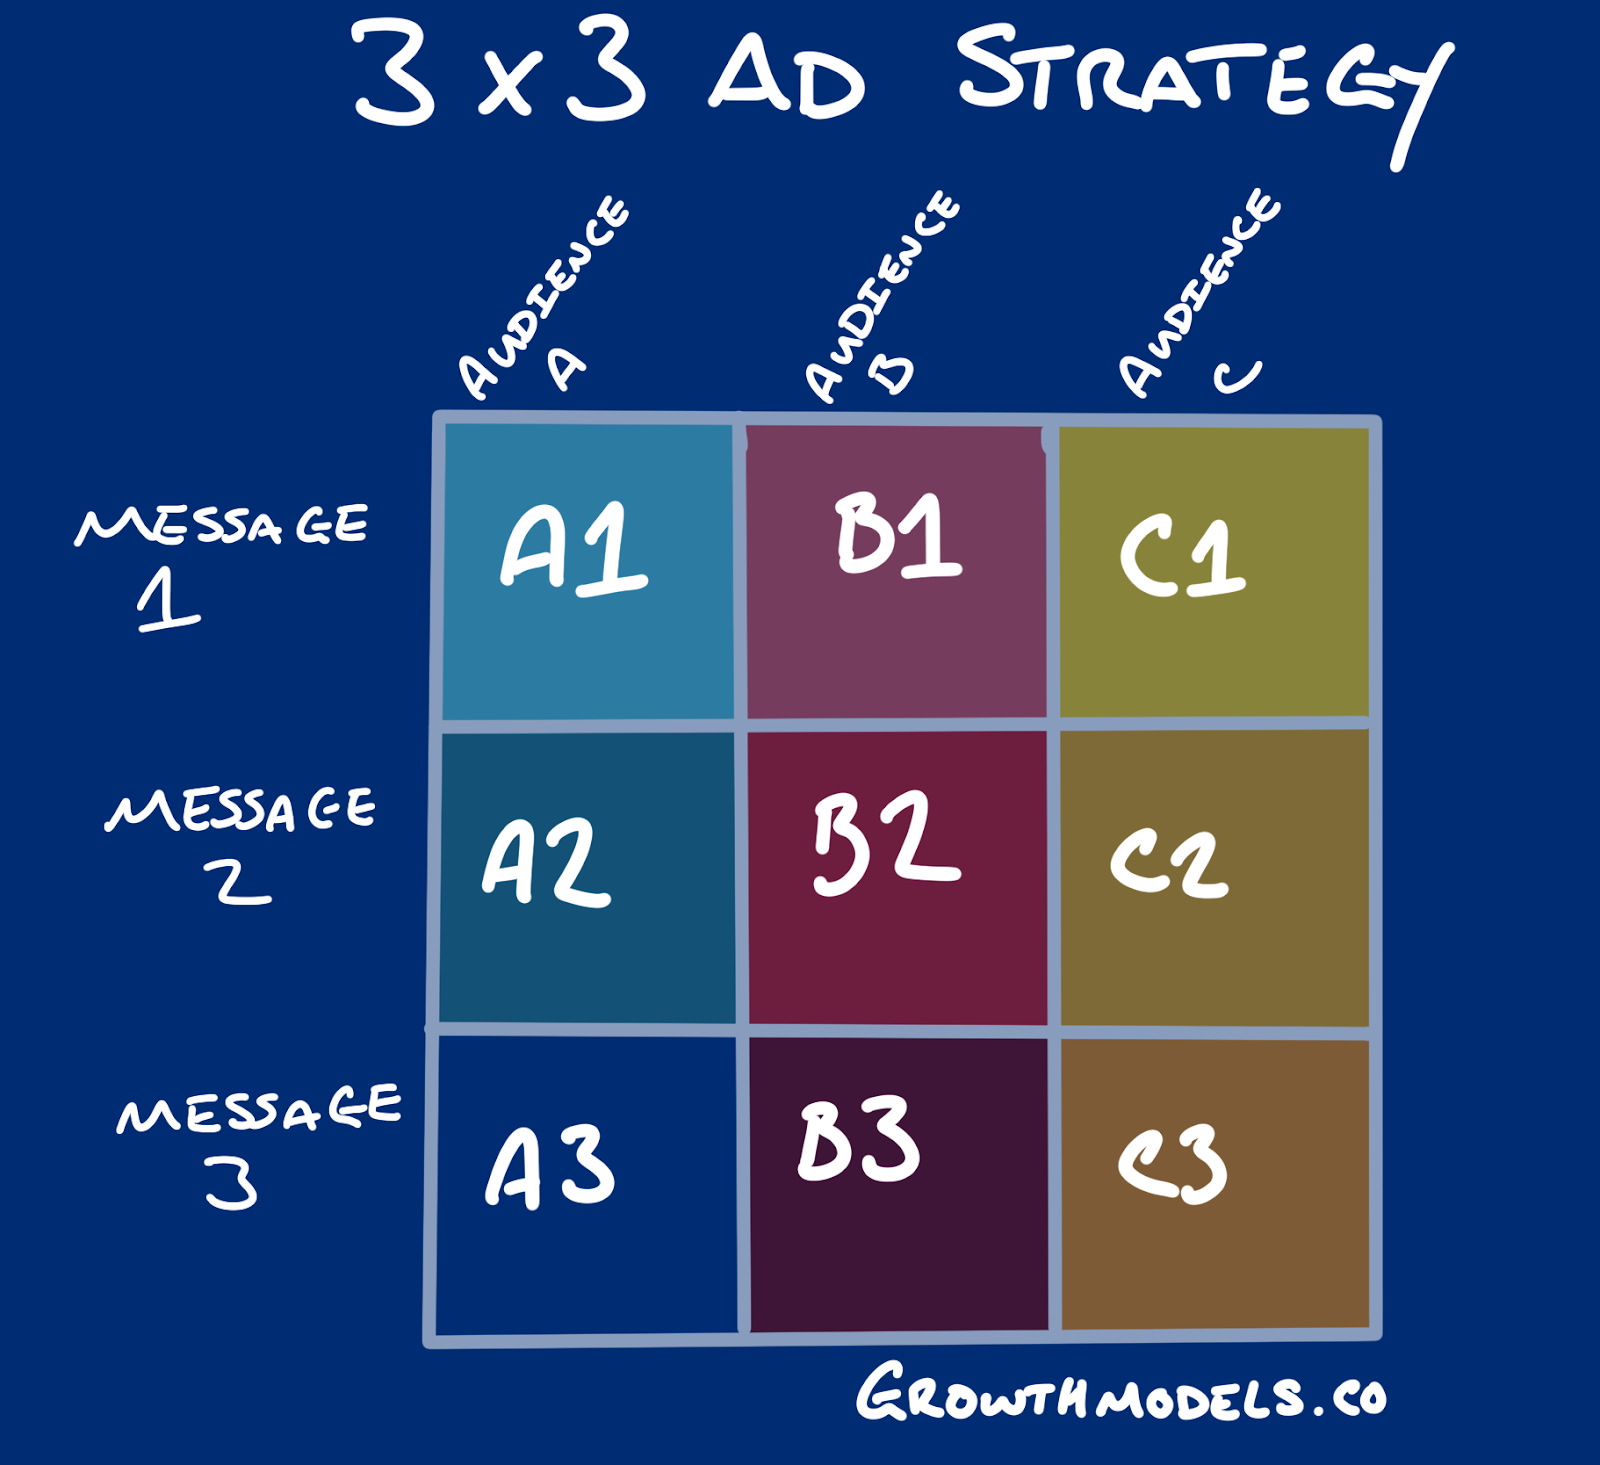 The 3x3 system for effective social ad scaling.  